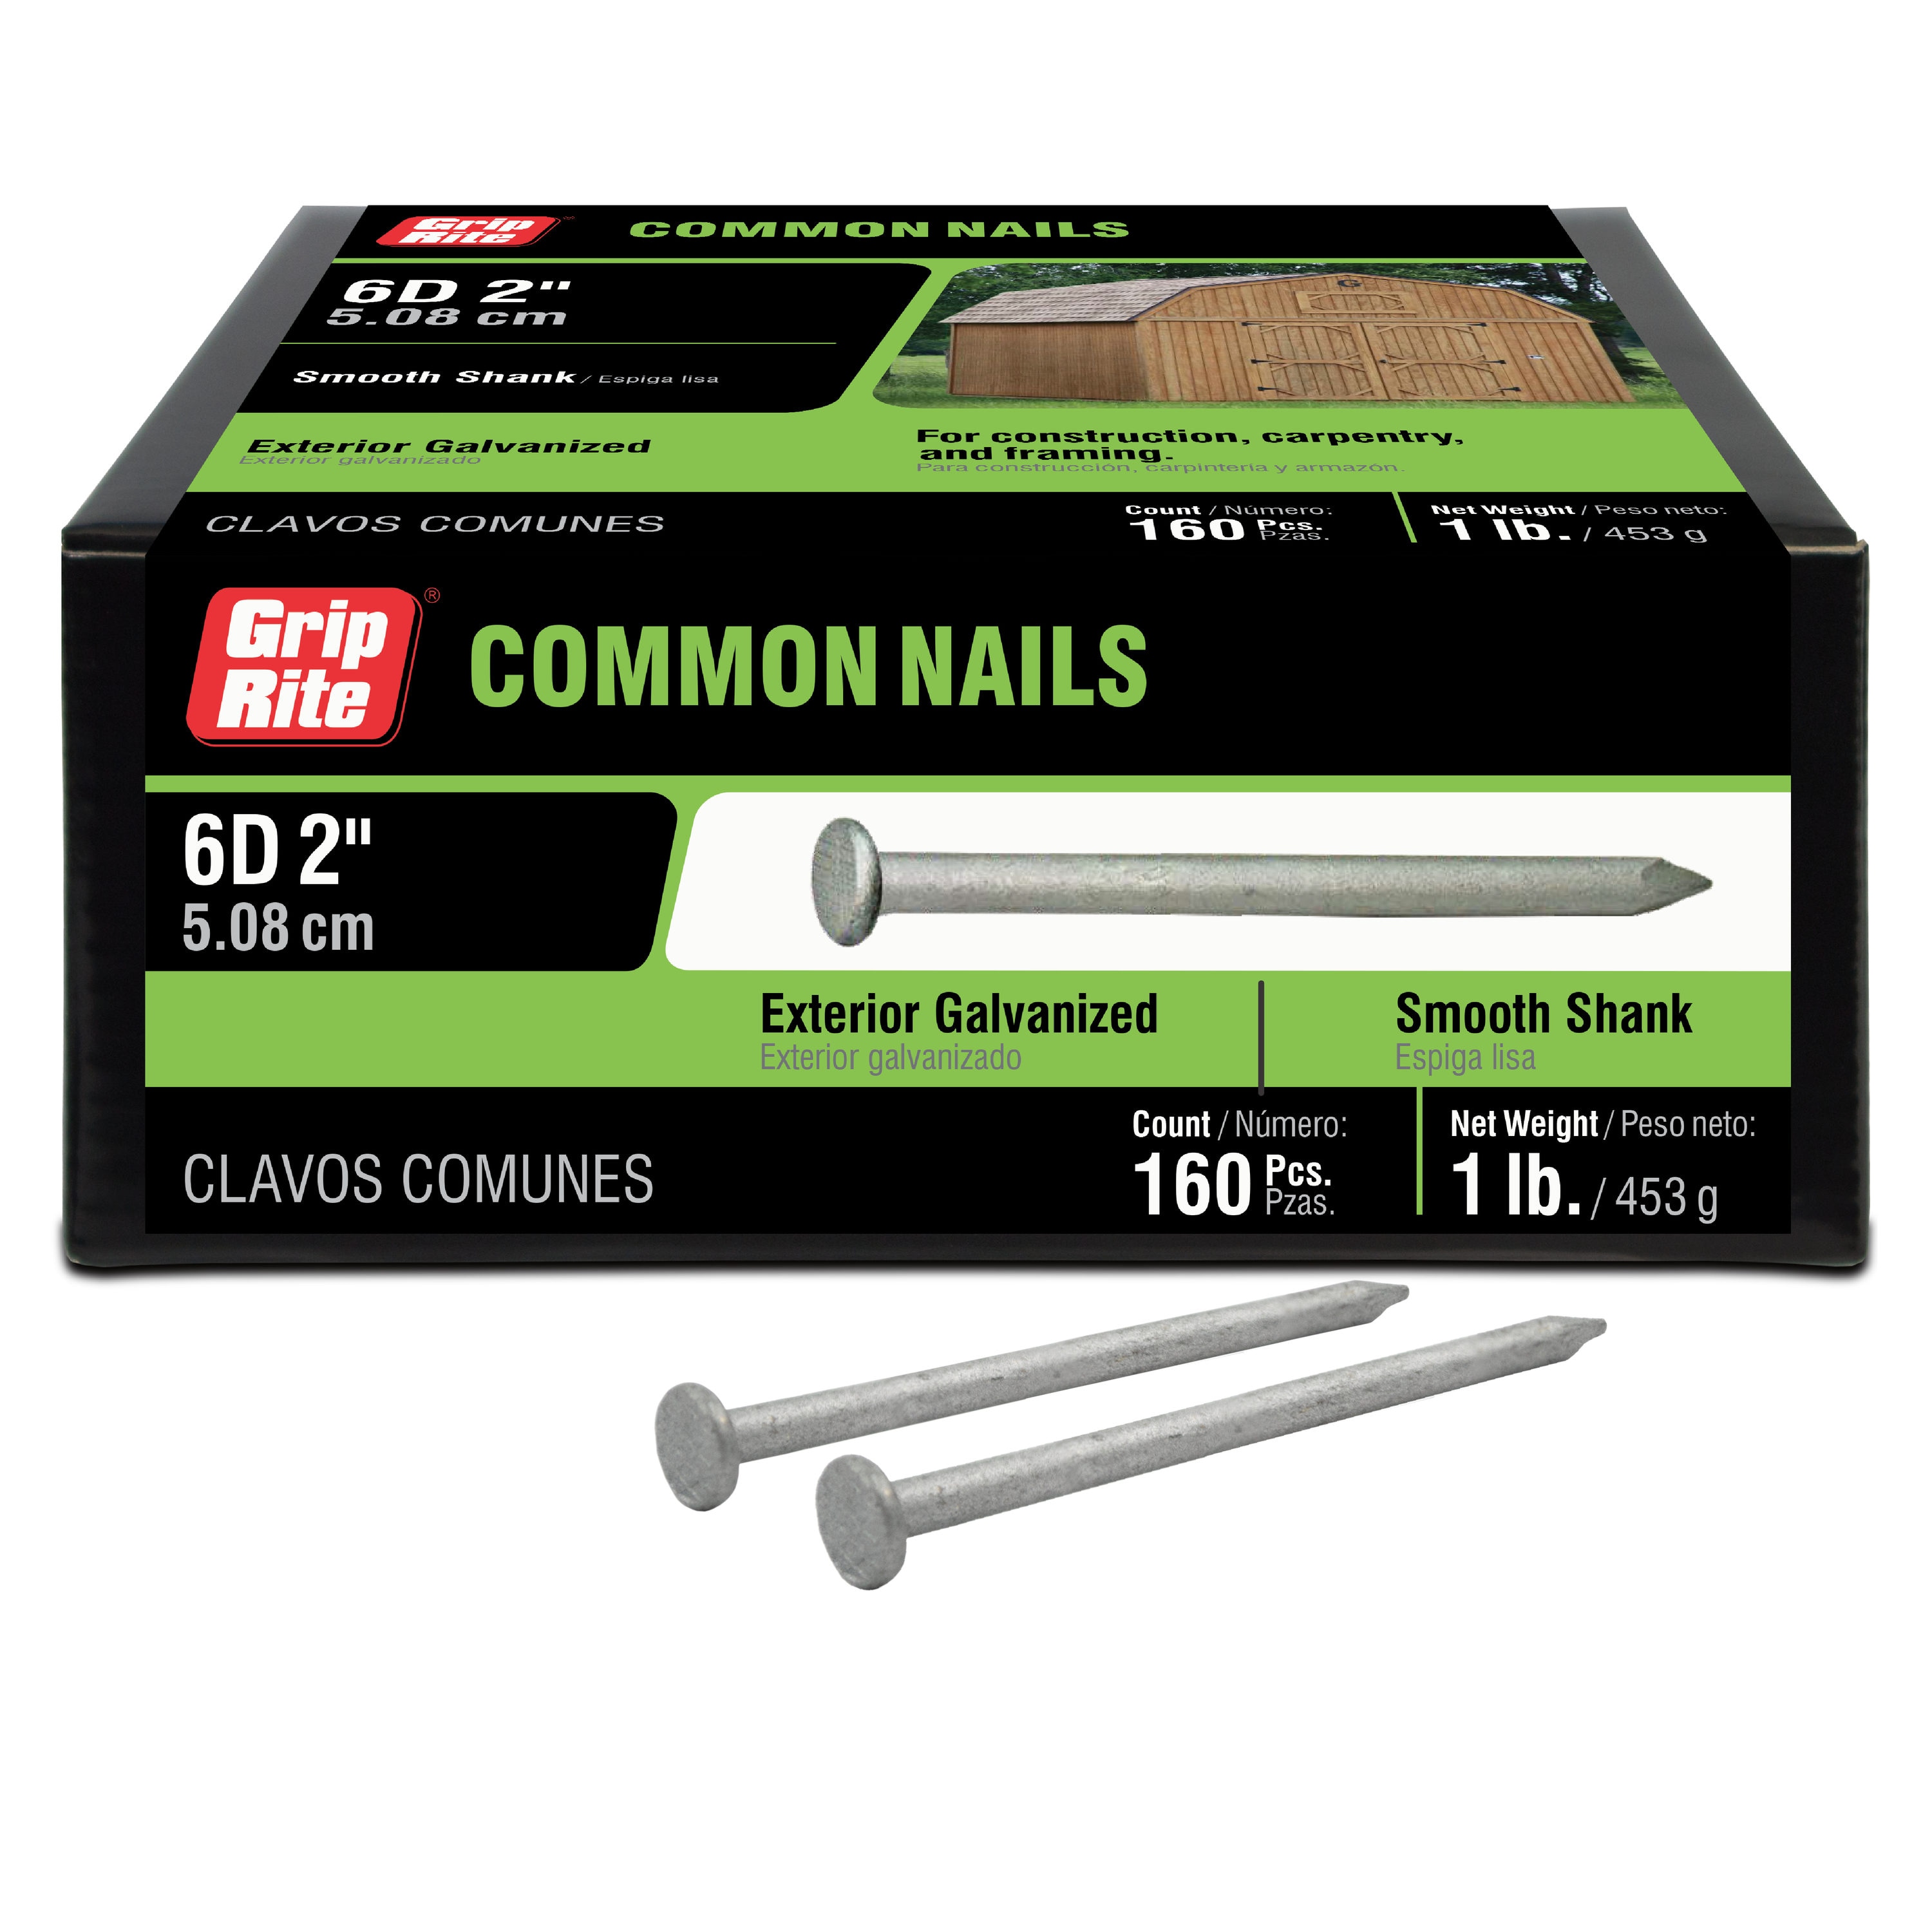 Grip-Rite 4HGC1 4D 1-1/2 in. Common Hot-Dipped Galvanized Steel Nail F